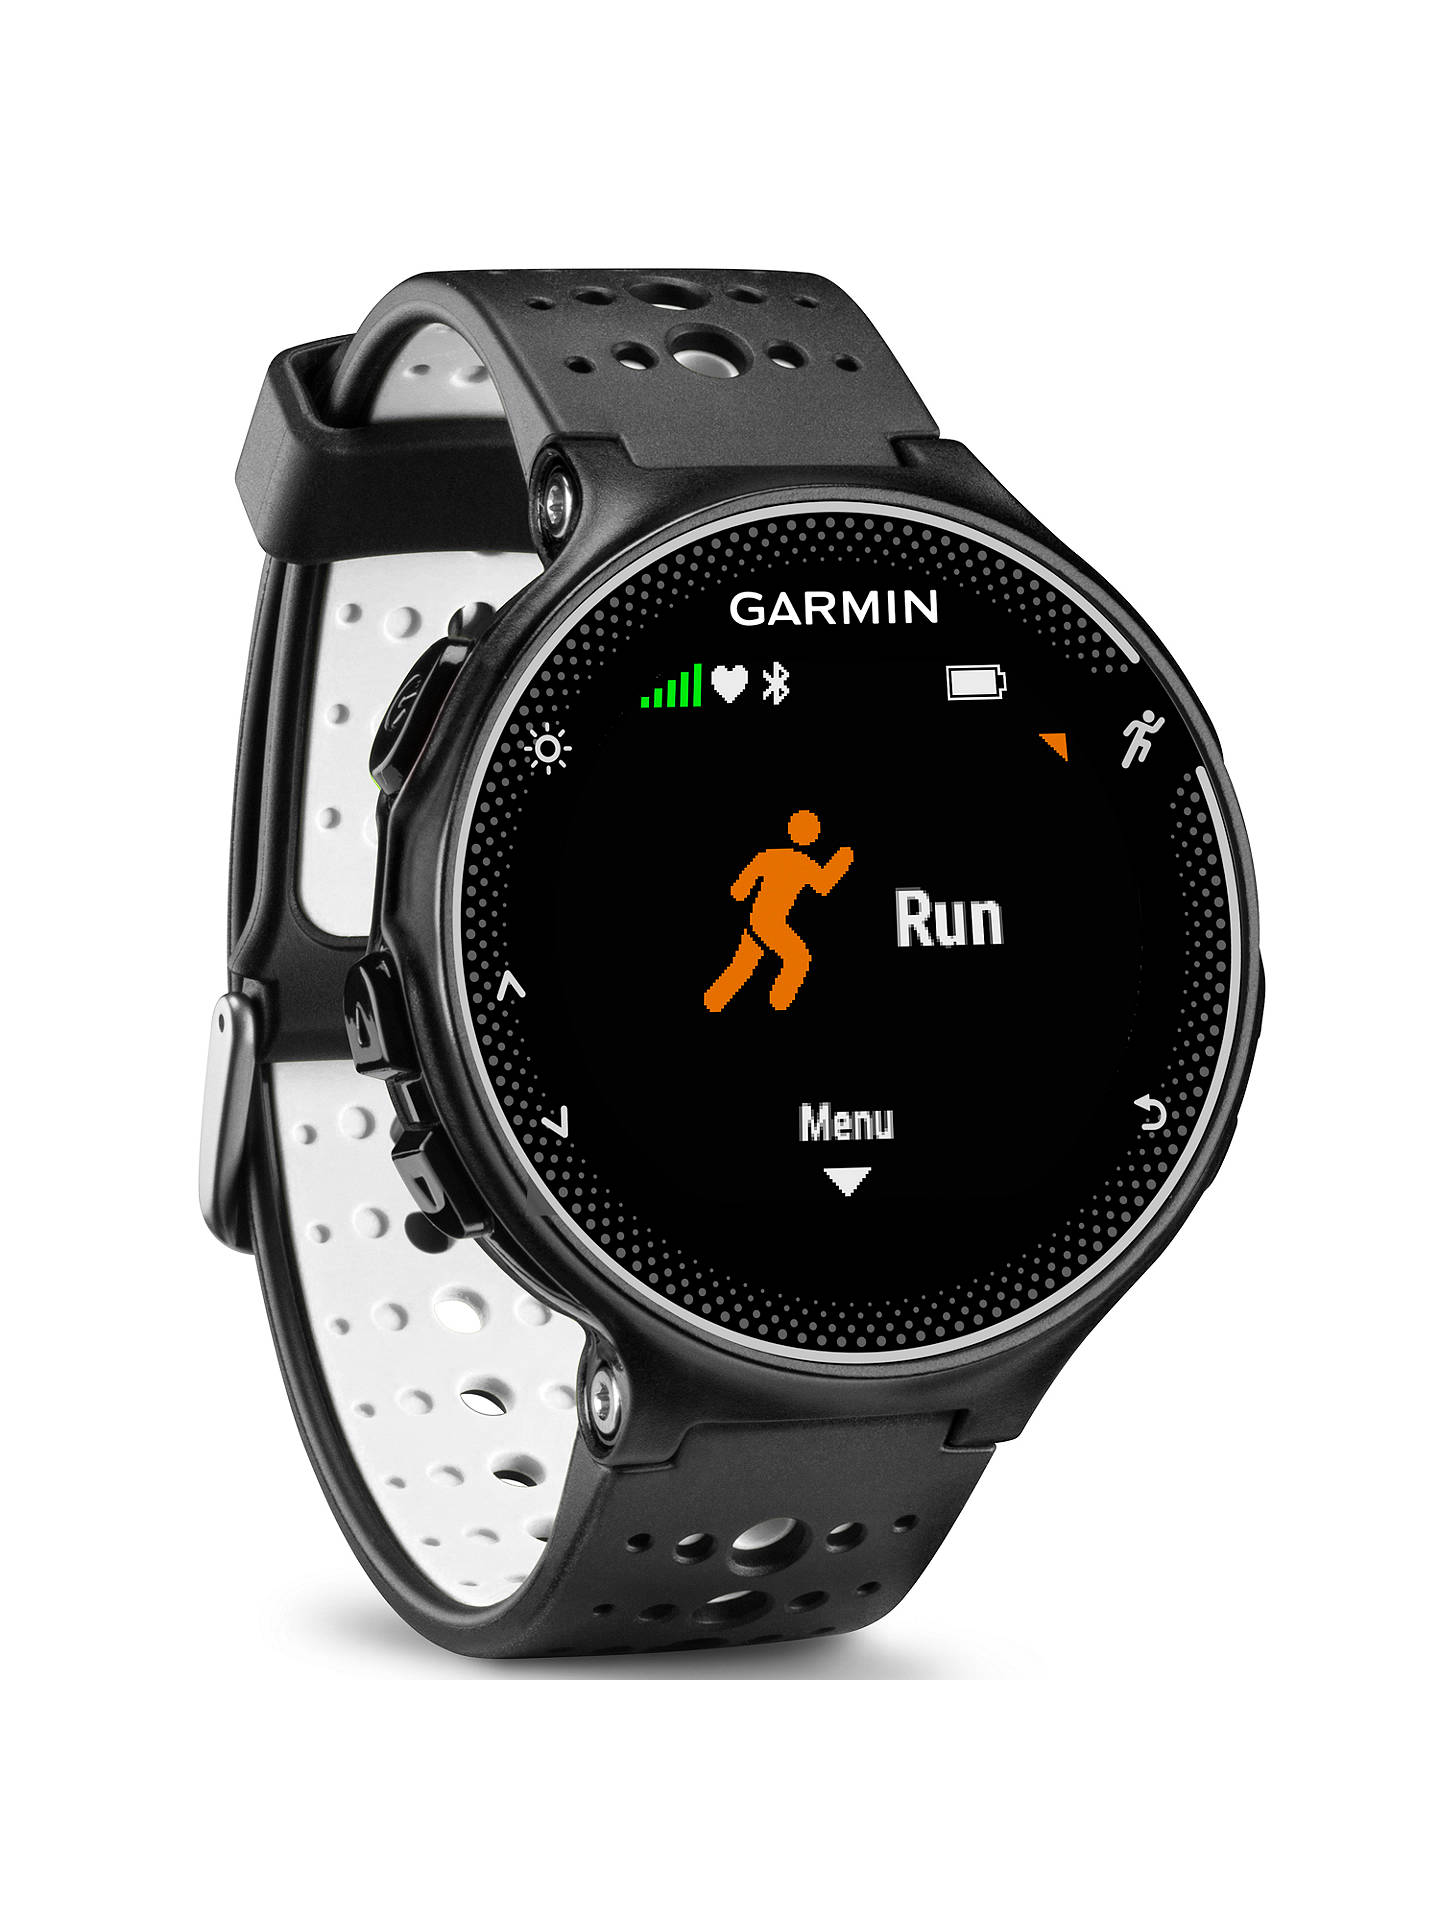 running watches with gps and heart rate monitor reviews